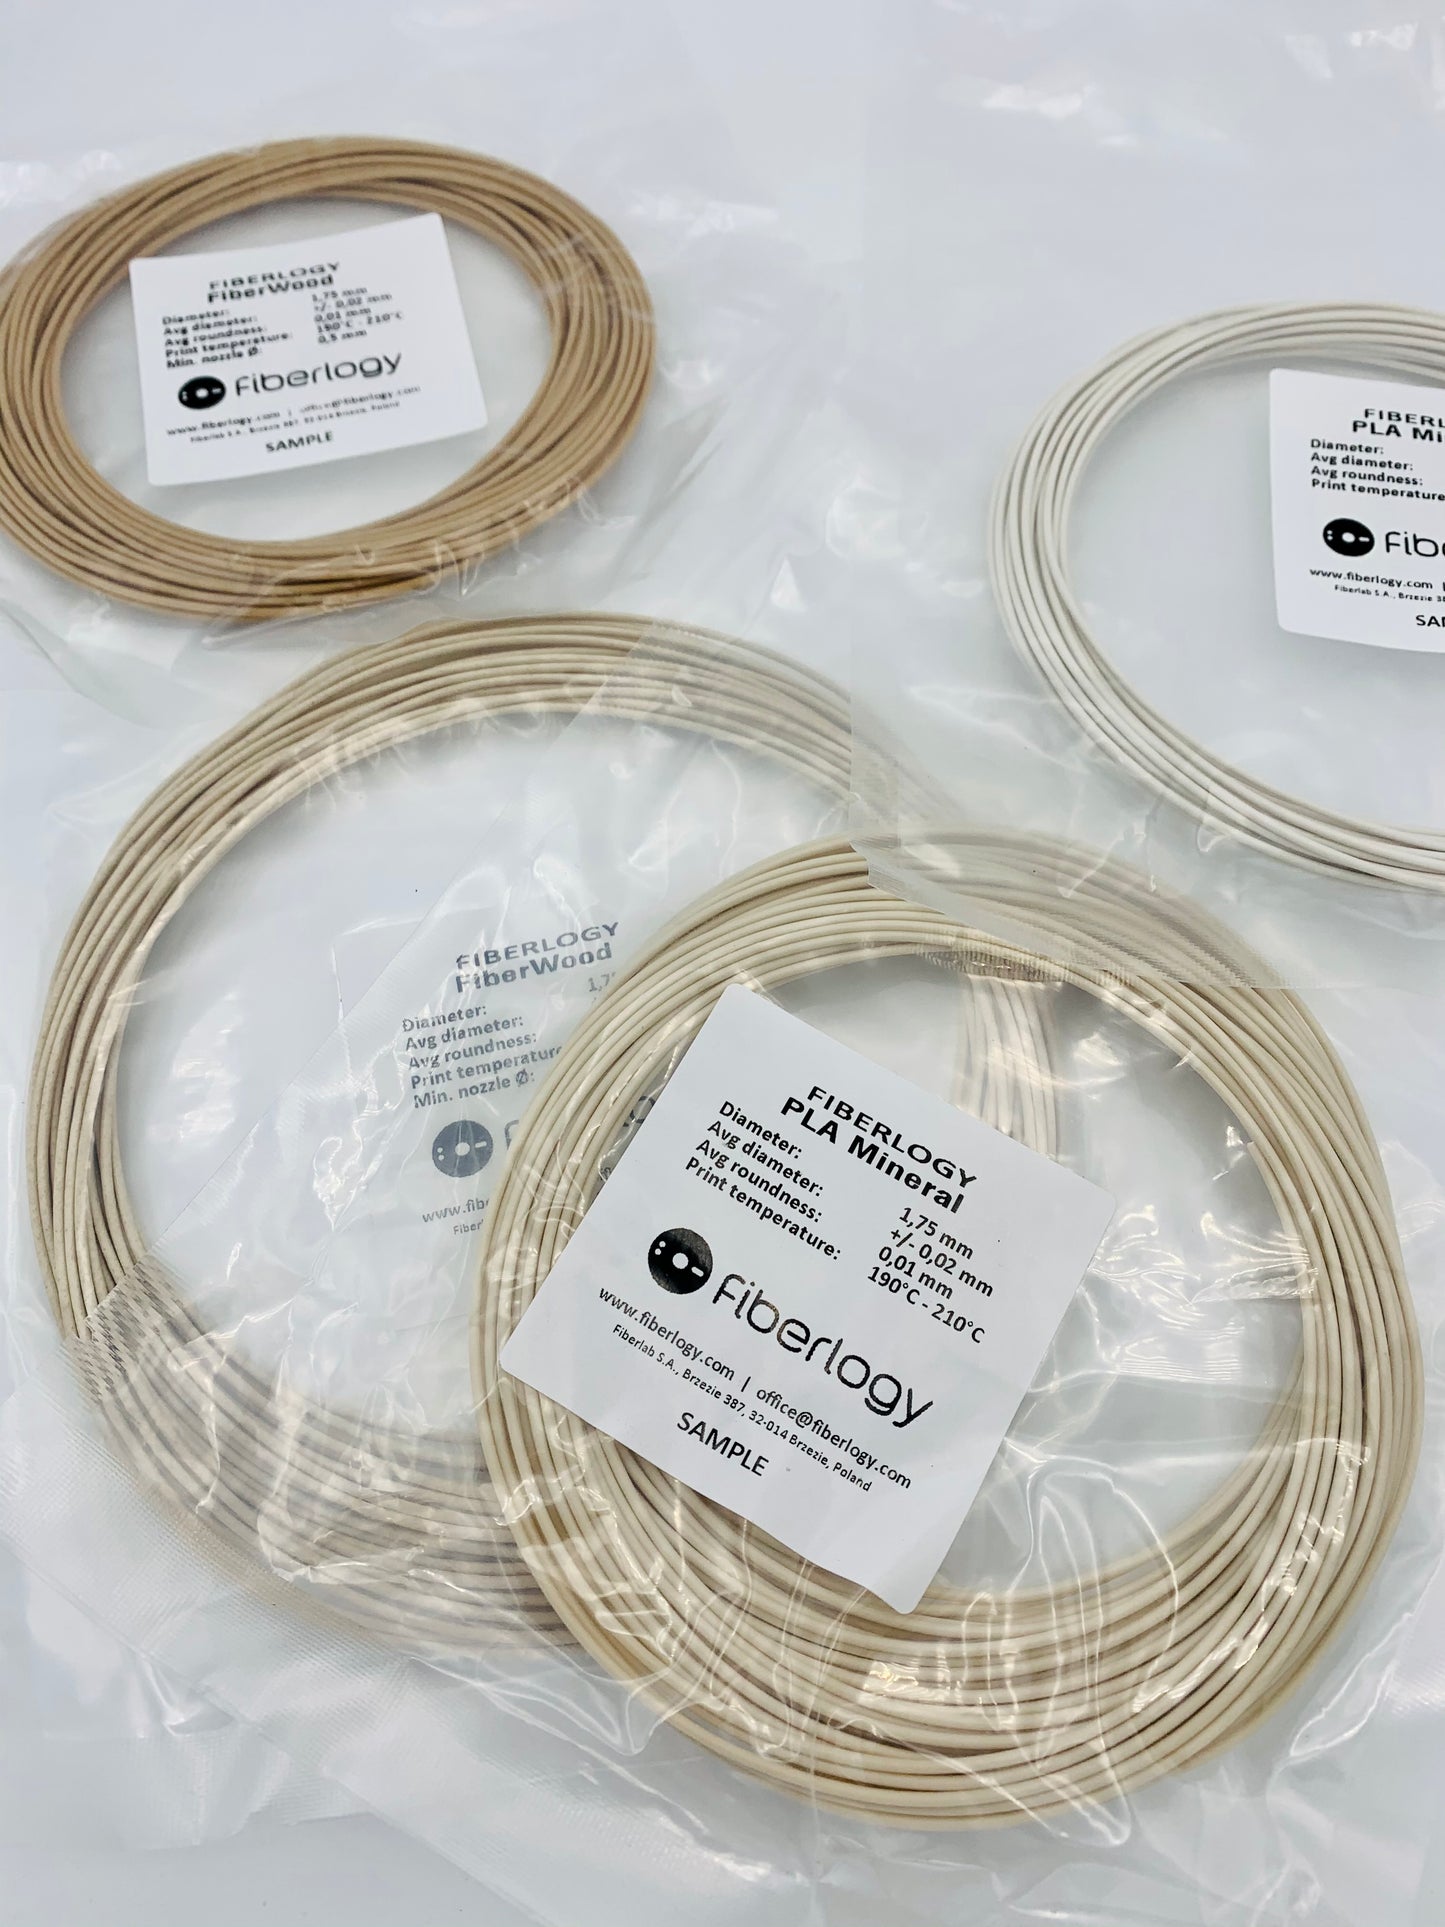 Fiberlogy PLA MINERAL Filament - Sample Size 20-45g (Sample) Satin Finish, High Detail, Precise for Artists and Unique Applications, 1.75mm